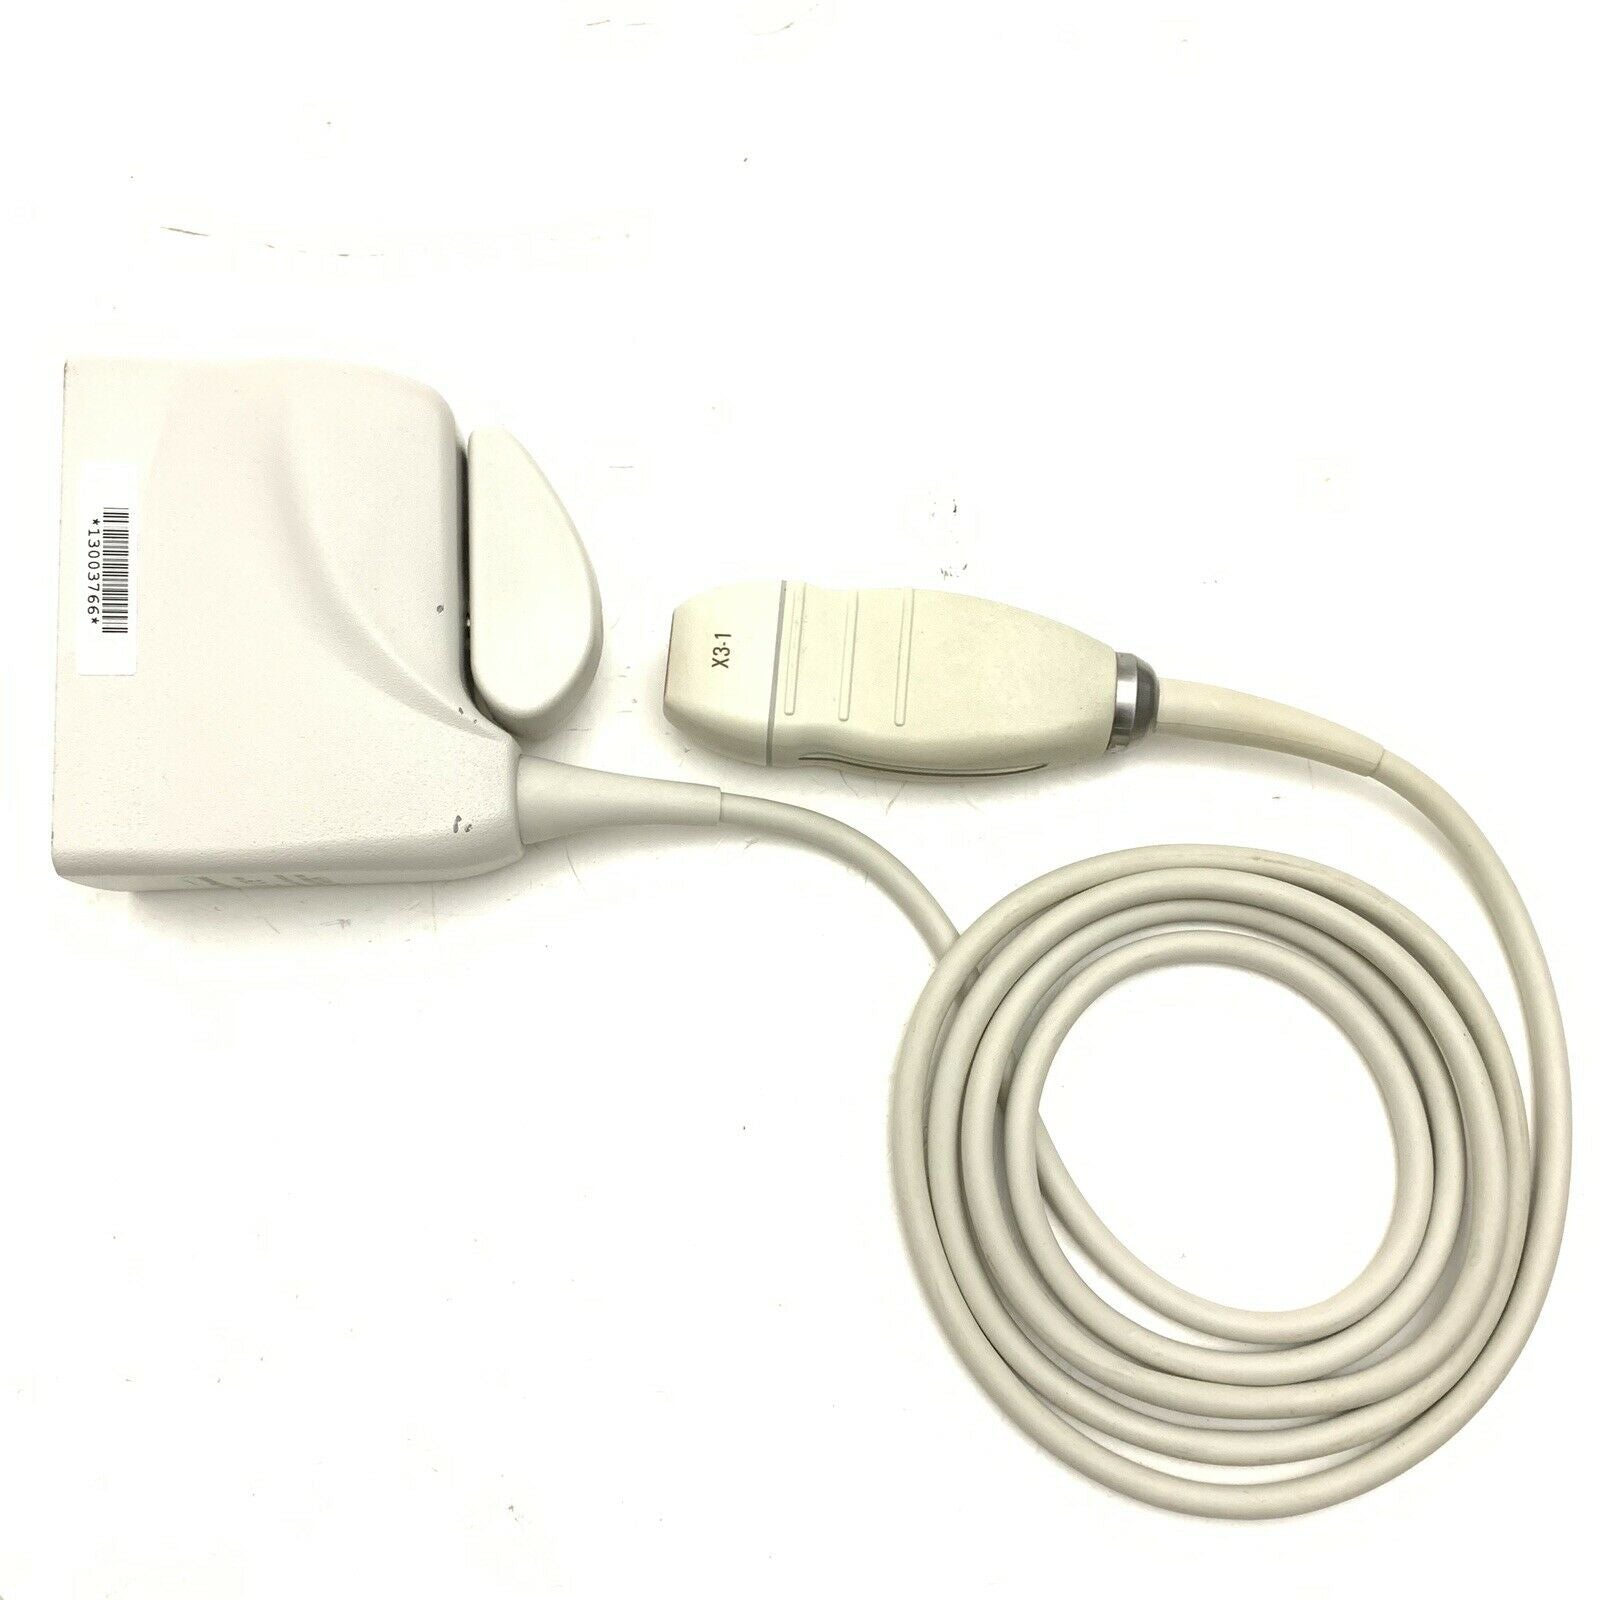 Philips X3-1 Ultrasound transducer Probe                      P/N 21715A DIAGNOSTIC ULTRASOUND MACHINES FOR SALE